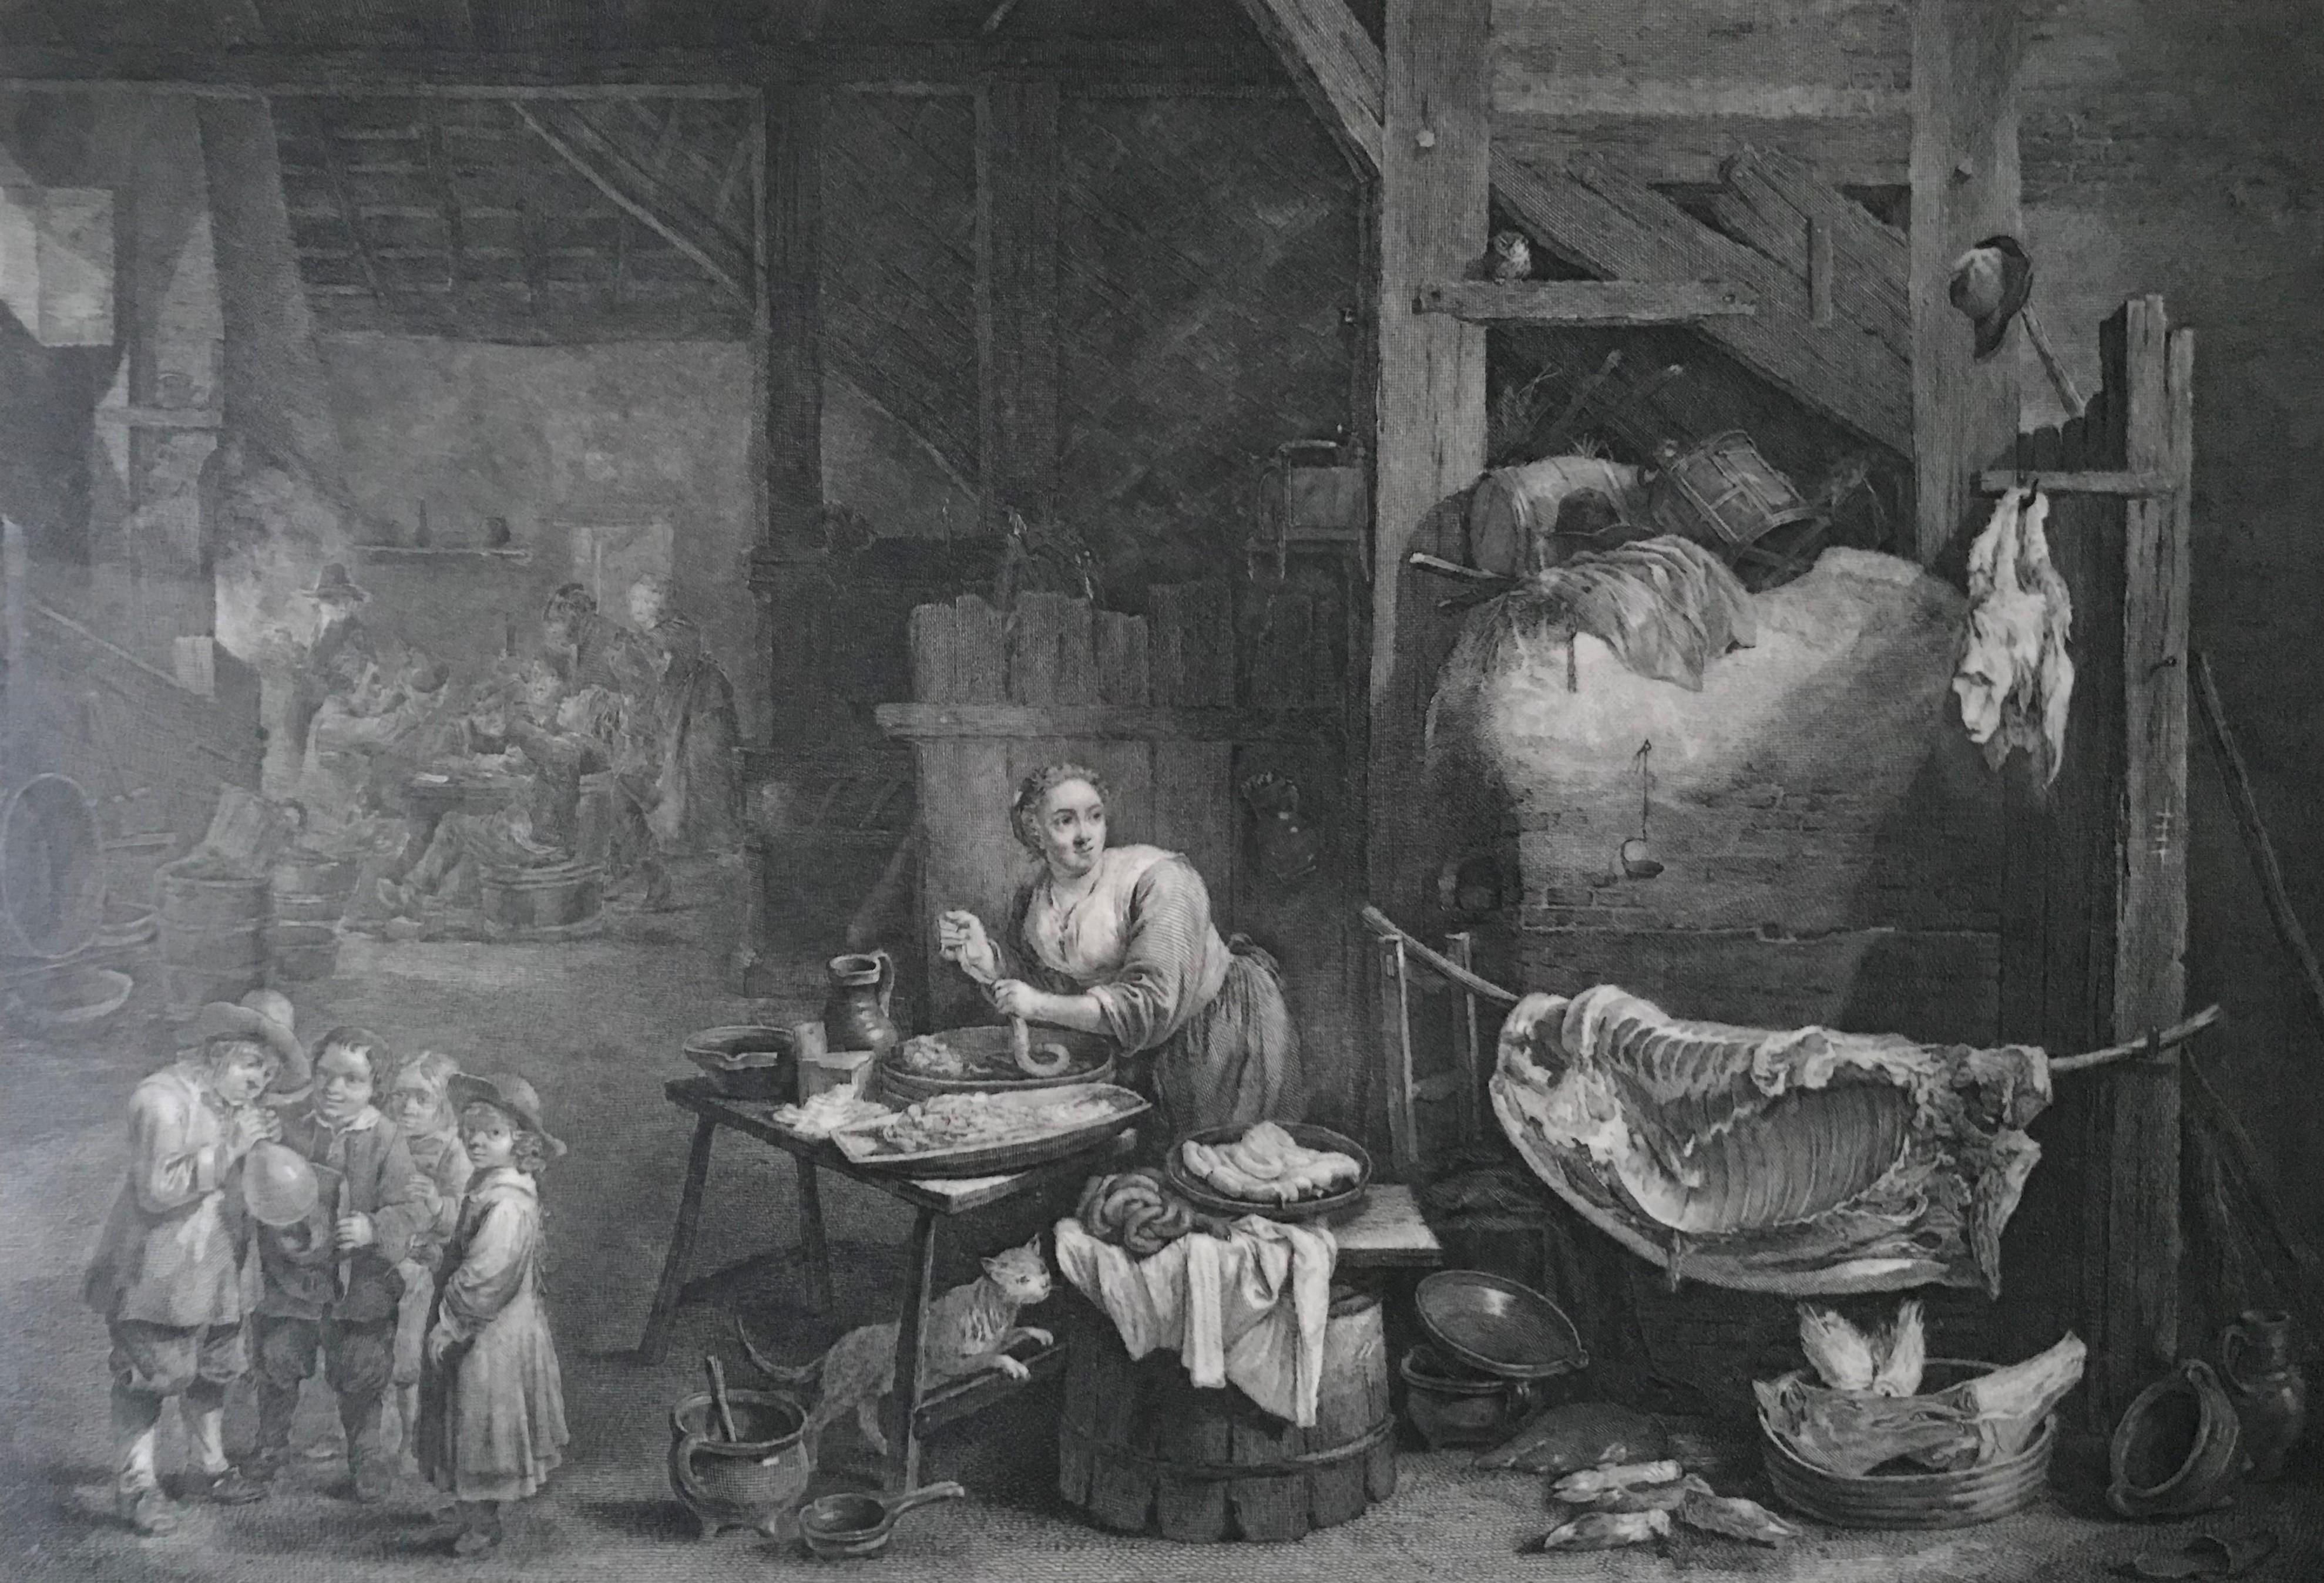 This beautiful engraving named La boudinière, is made by Jacques Philippe LeBas after the work of David Teniers II. This engraving represents a kitchen interior divided by partitions. In the foreground, there is the carcass of a half pig hanging.